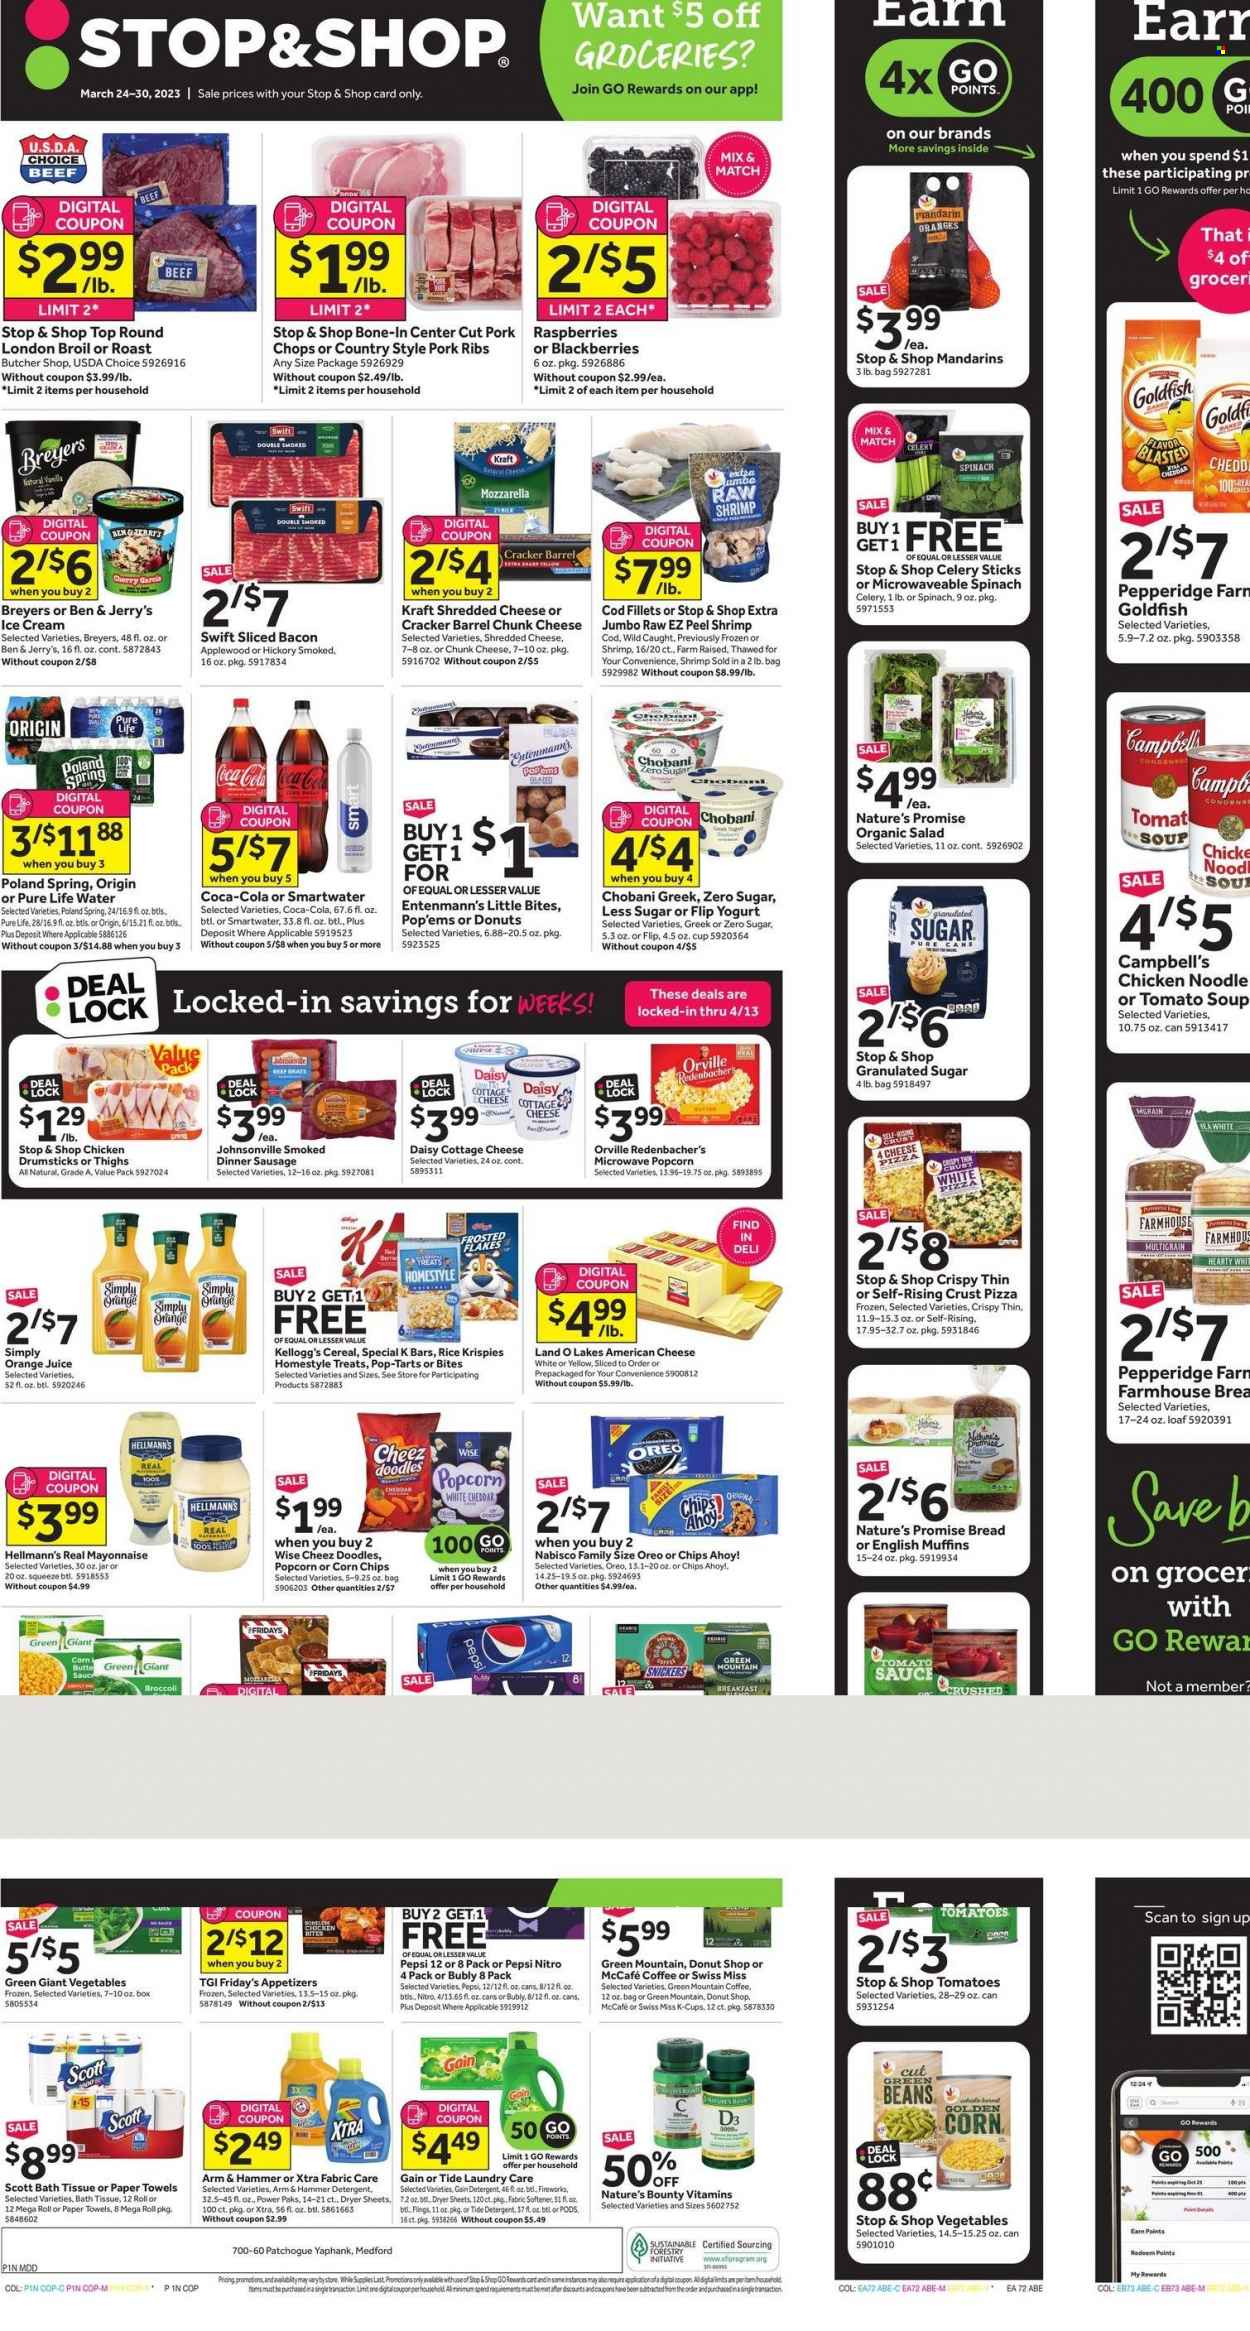 thumbnail - Stop & Shop Flyer - 03/24/2023 - 03/30/2023 - Sales products - bread, english muffins, Nature’s Promise, Entenmann's, green beans, salad, blackberries, mandarines, cherries, chicken drumsticks, chicken, ribs, roast, Johnsonville, pork chops, pork meat, pork ribs, cod, shrimps, Campbell's, tomato soup, pizza, soup, sauce, noodles, Kraft®, bacon, sausage, american cheese, cottage cheese, shredded cheese, chunk cheese, yoghurt, Chobani, Swiss Miss, mayonnaise, Hellmann’s, ice cream, Ben & Jerry's, Snickers, crackers, Kellogg's, Pop-Tarts, Chips Ahoy!, Little Bites, corn chips, popcorn, Goldfish, celery sticks, ARM & HAMMER, granulated sugar, tomato sauce, cereals, Rice Krispies, Frosted Flakes, Coca-Cola, Pepsi, orange juice, juice, Pure Life Water, Smartwater, water, coffee, coffee capsules, McCafe, K-Cups, Green Mountain, bath tissue, Scott, kitchen towels, paper towels, detergent, Gain, Tide, dryer sheets, XTRA, Nature's Bounty, vitamin D3. Page 1.